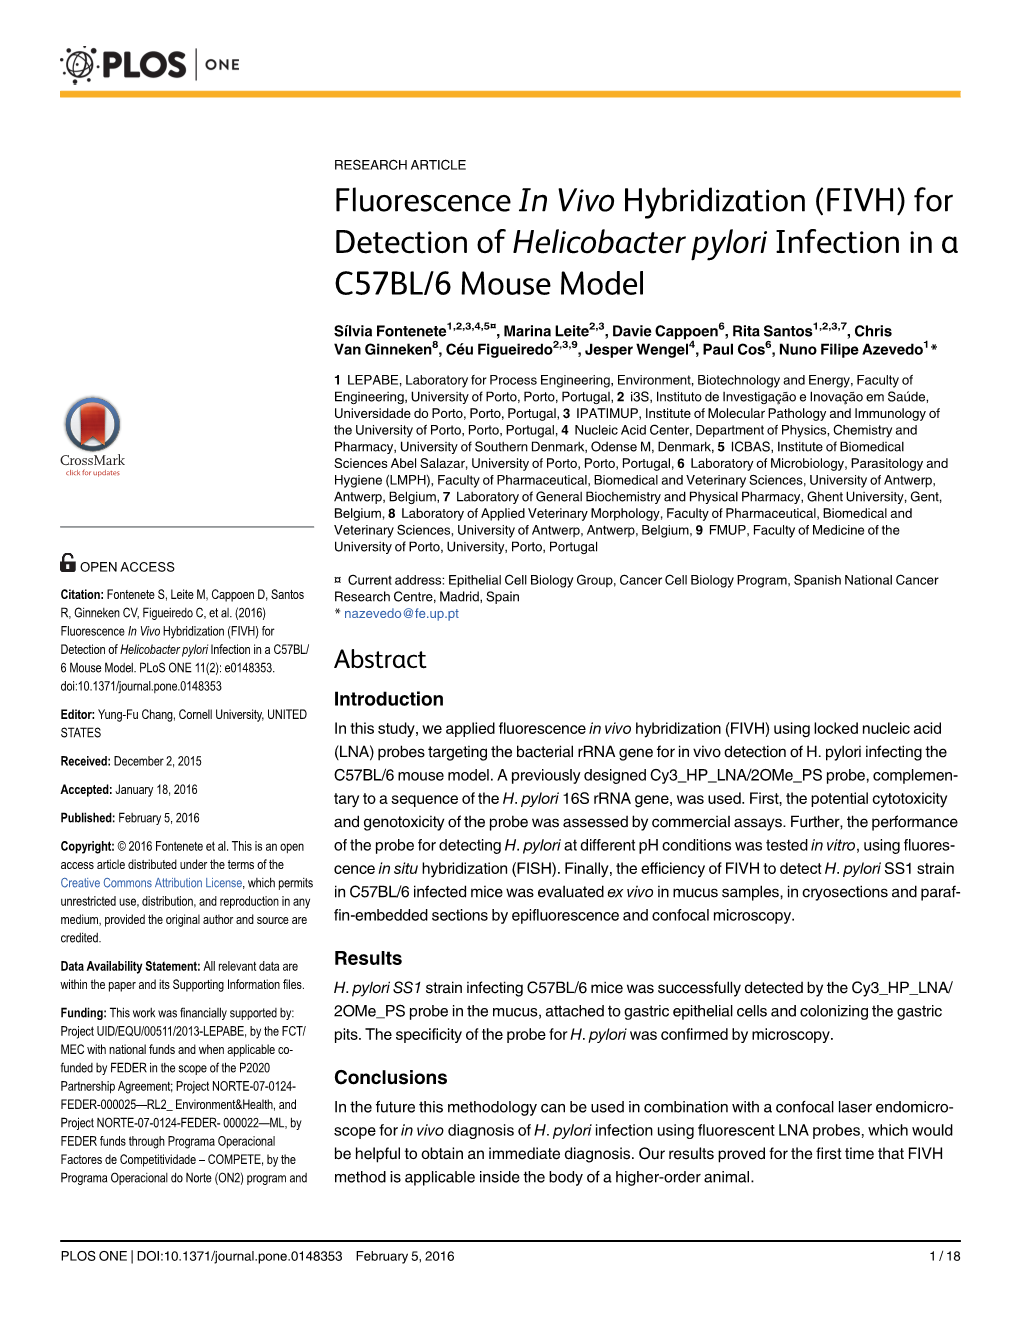 Fluorescence in Vivo Hybridization (FIVH) for Detection of Helicobacter Pylori Infection in a C57BL/6 Mouse Model